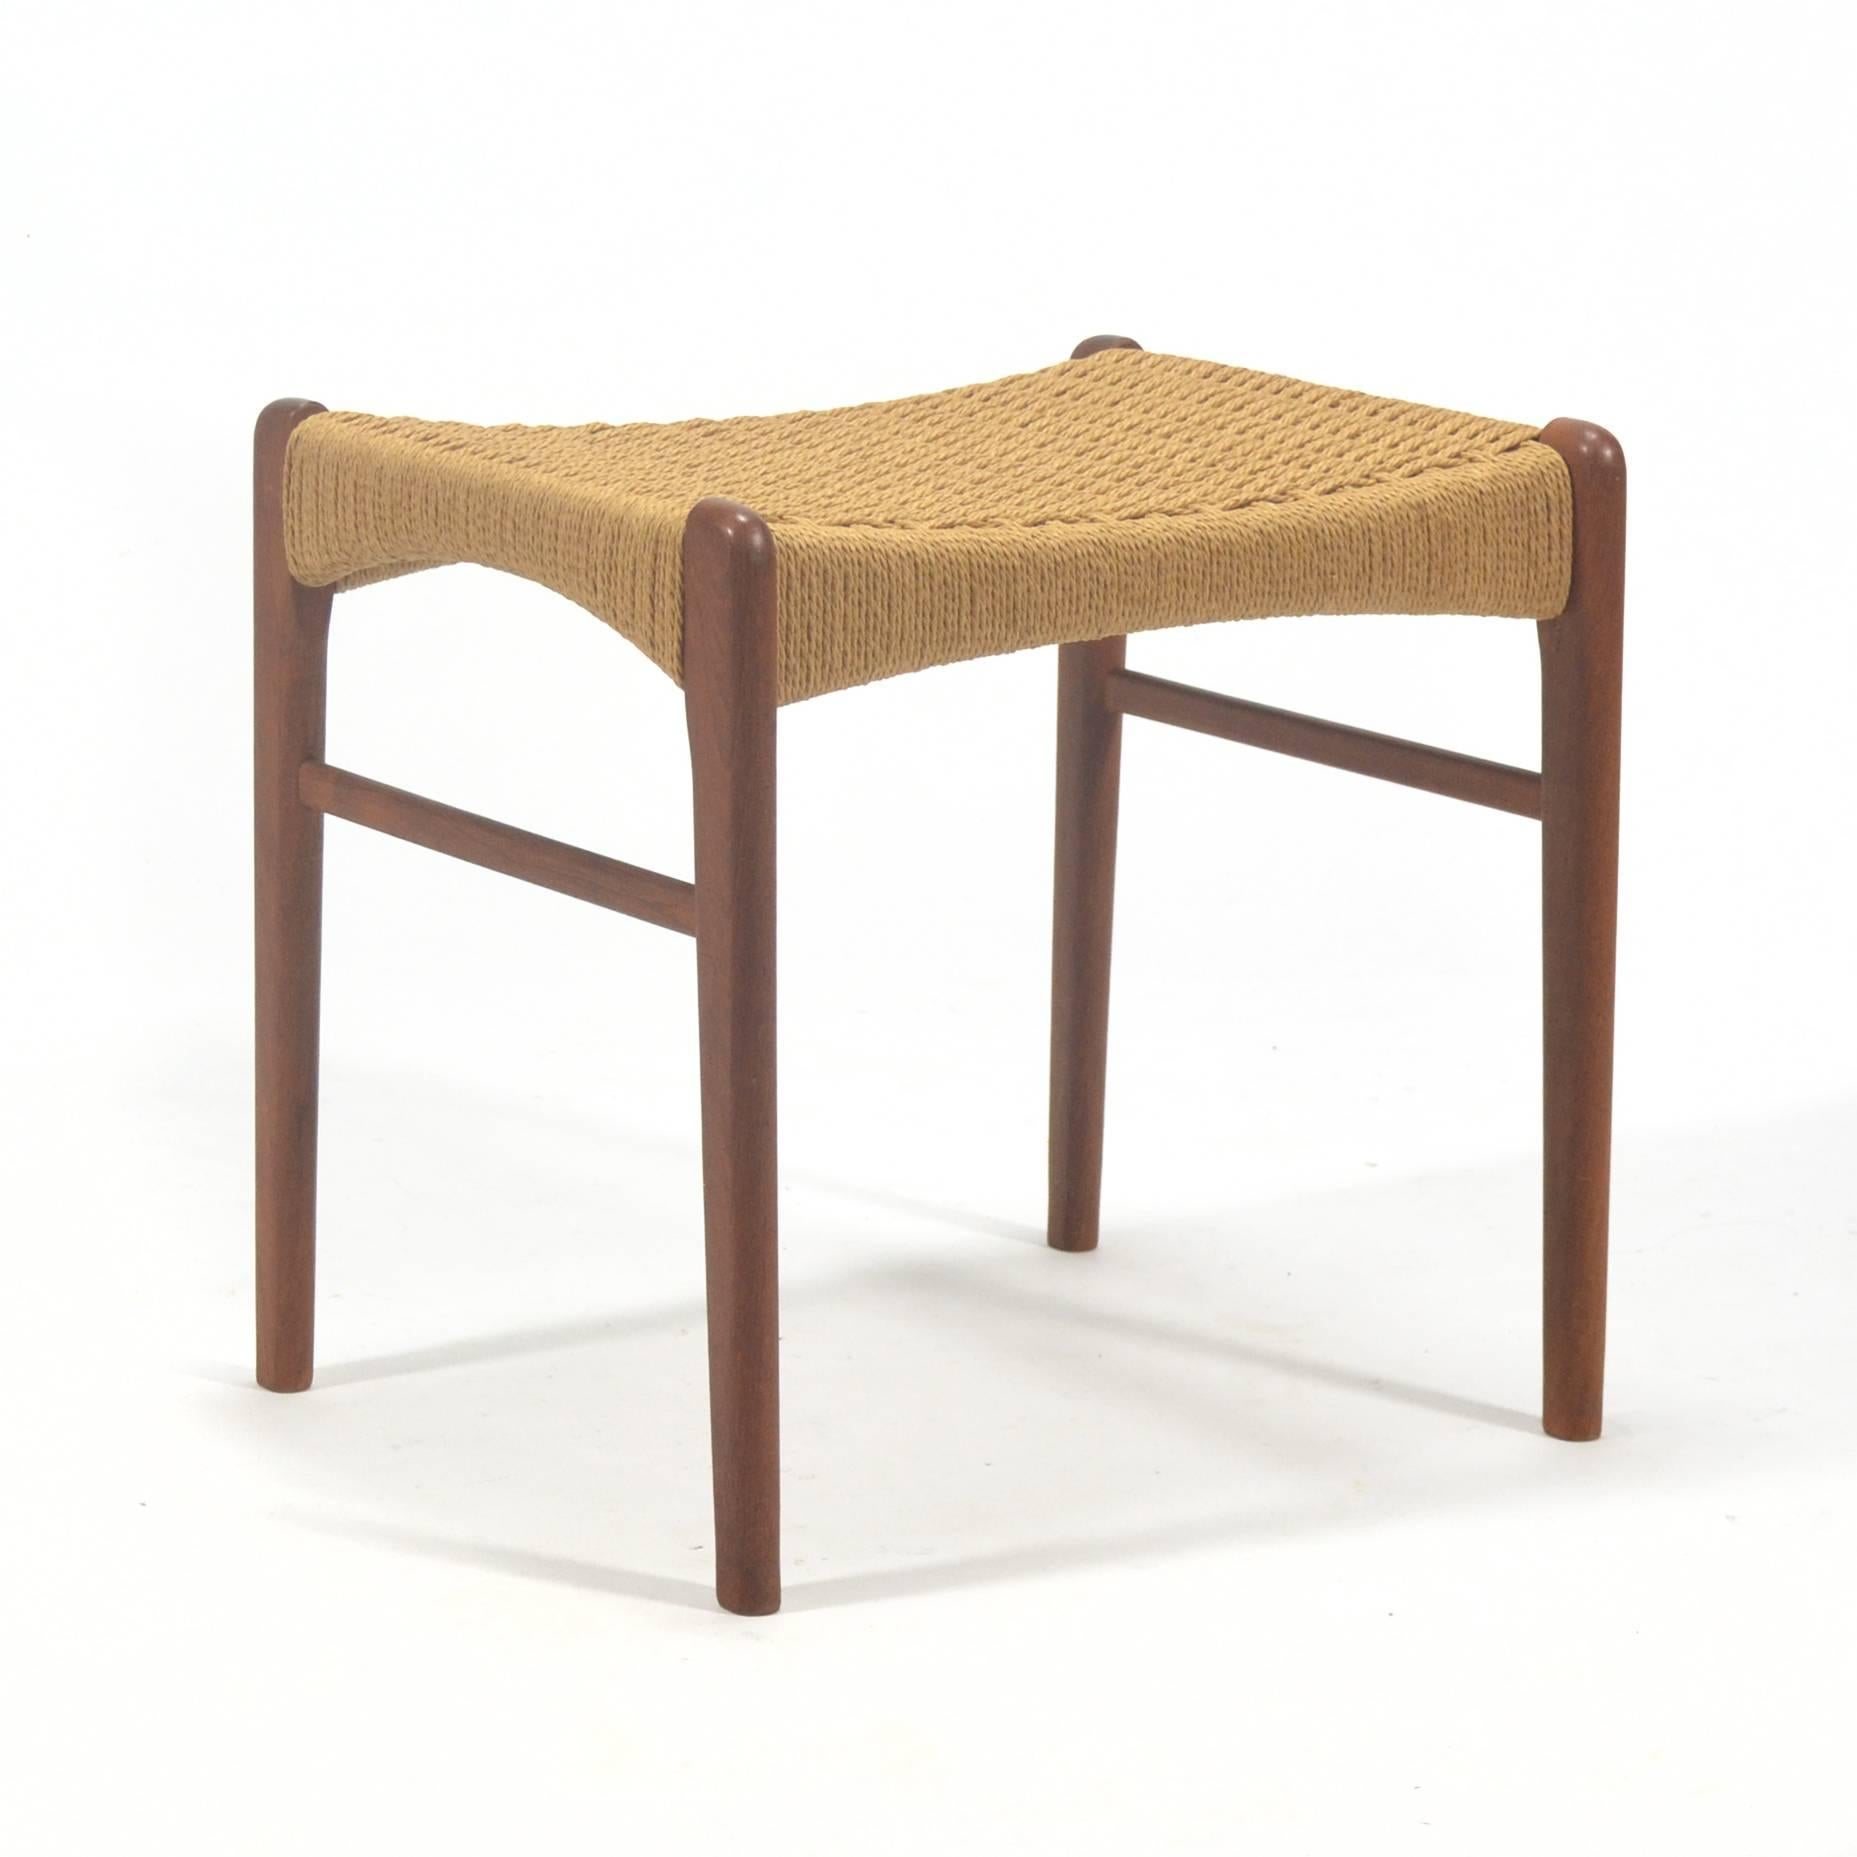 This teak stool by Peder Kristensen for Glyngore Stolefabrick is a beautiful example of Classic Danish modern design. Expert craftsmanship, fine lines and a seat of woven papercord make this the perfect occasional piece.